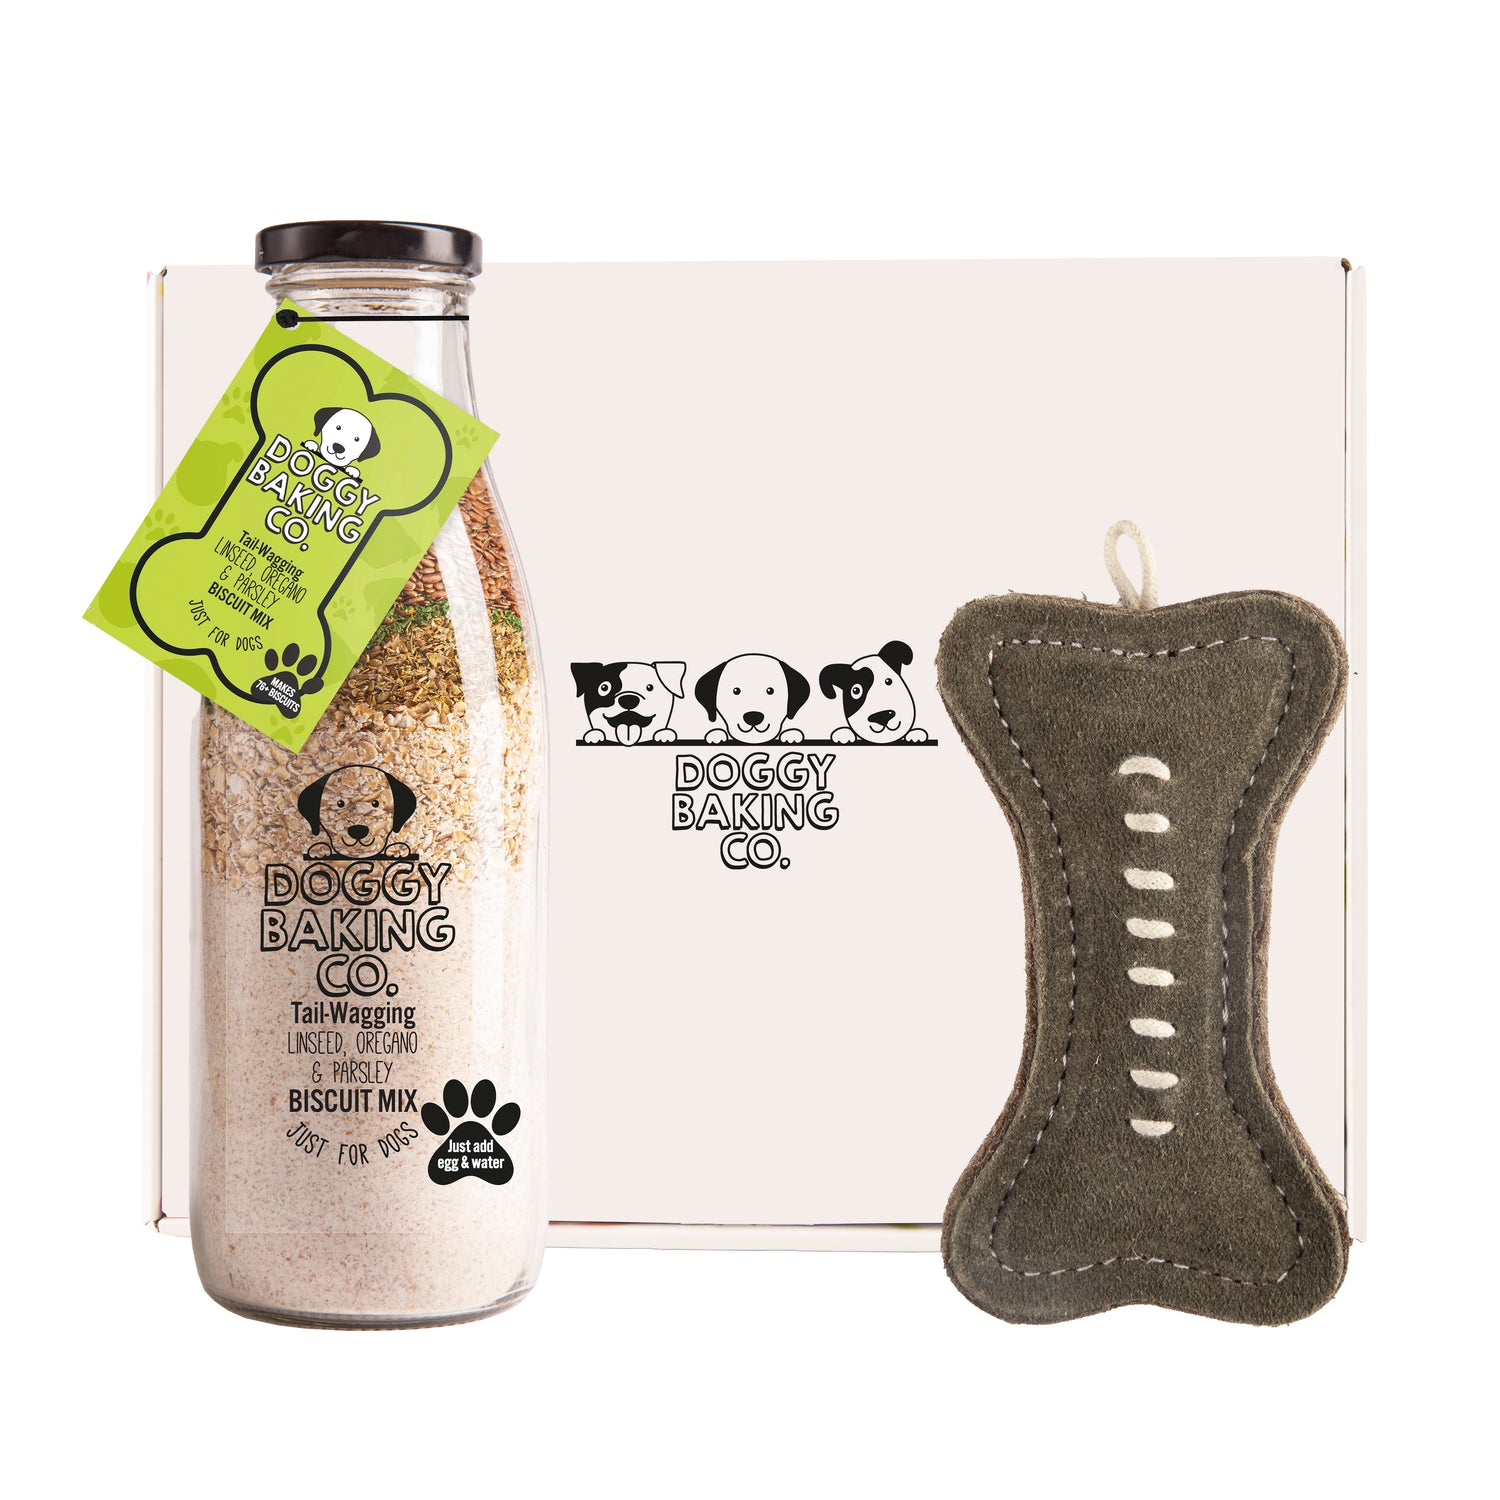 Linseed, Oregano & Parsley Biscuit Mix & Green Bone Toy Gift box - Doggy Baking Co by The Bottled Baking Co